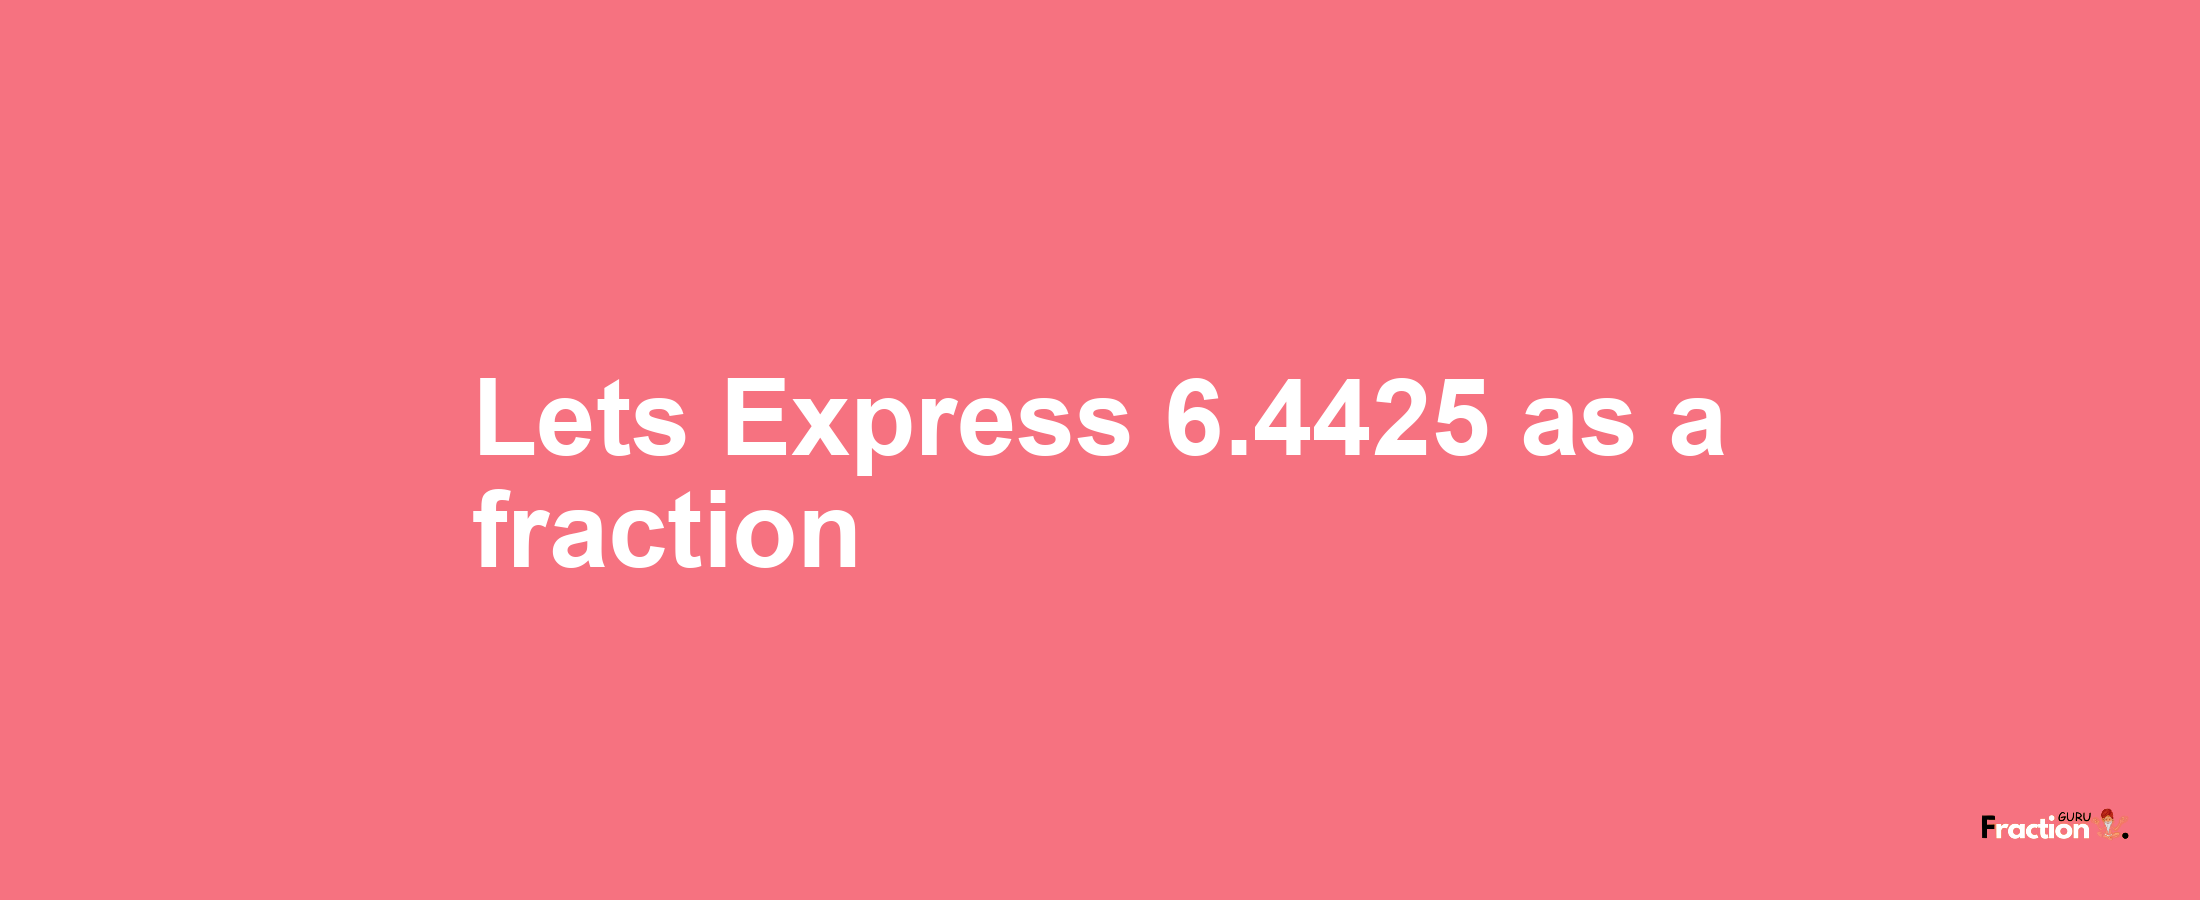 Lets Express 6.4425 as afraction